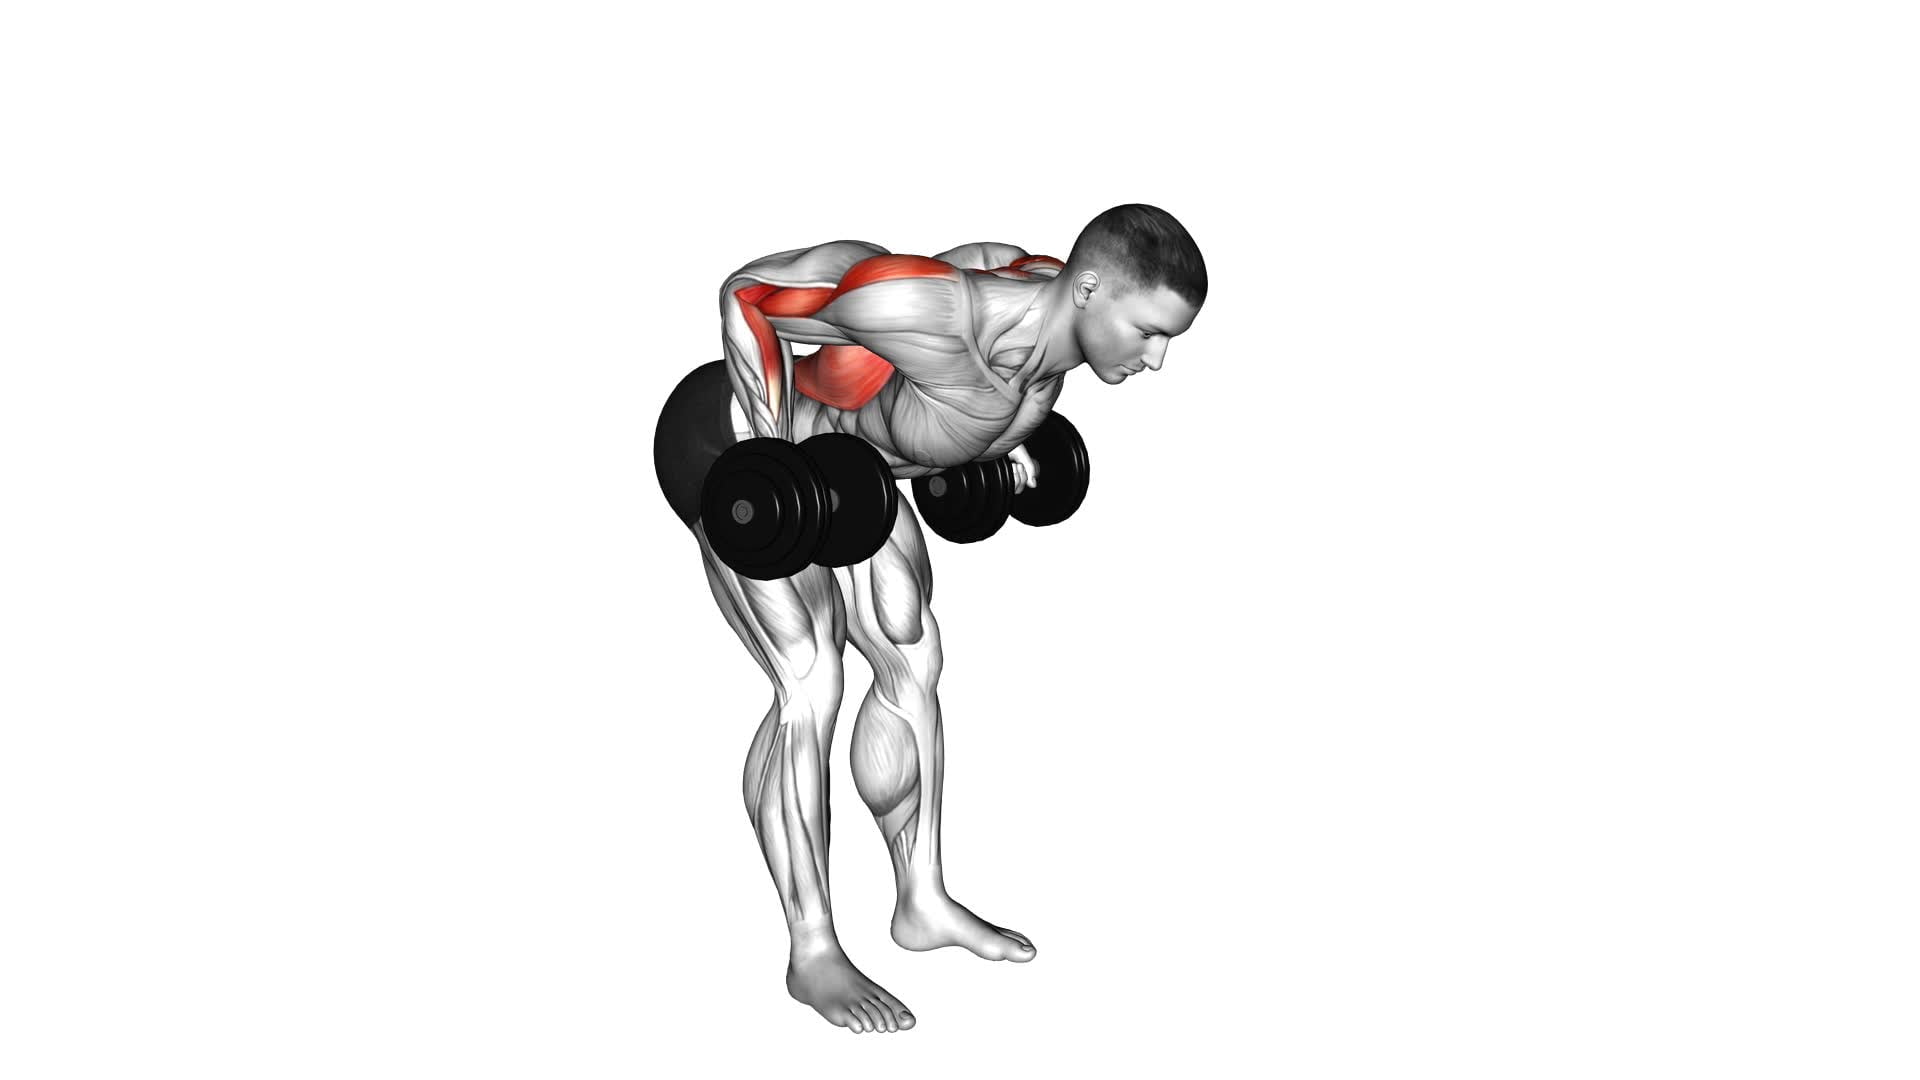 Dumbbell Palm Rotational Bent-Over Row - Video Exercise Guide & Tips